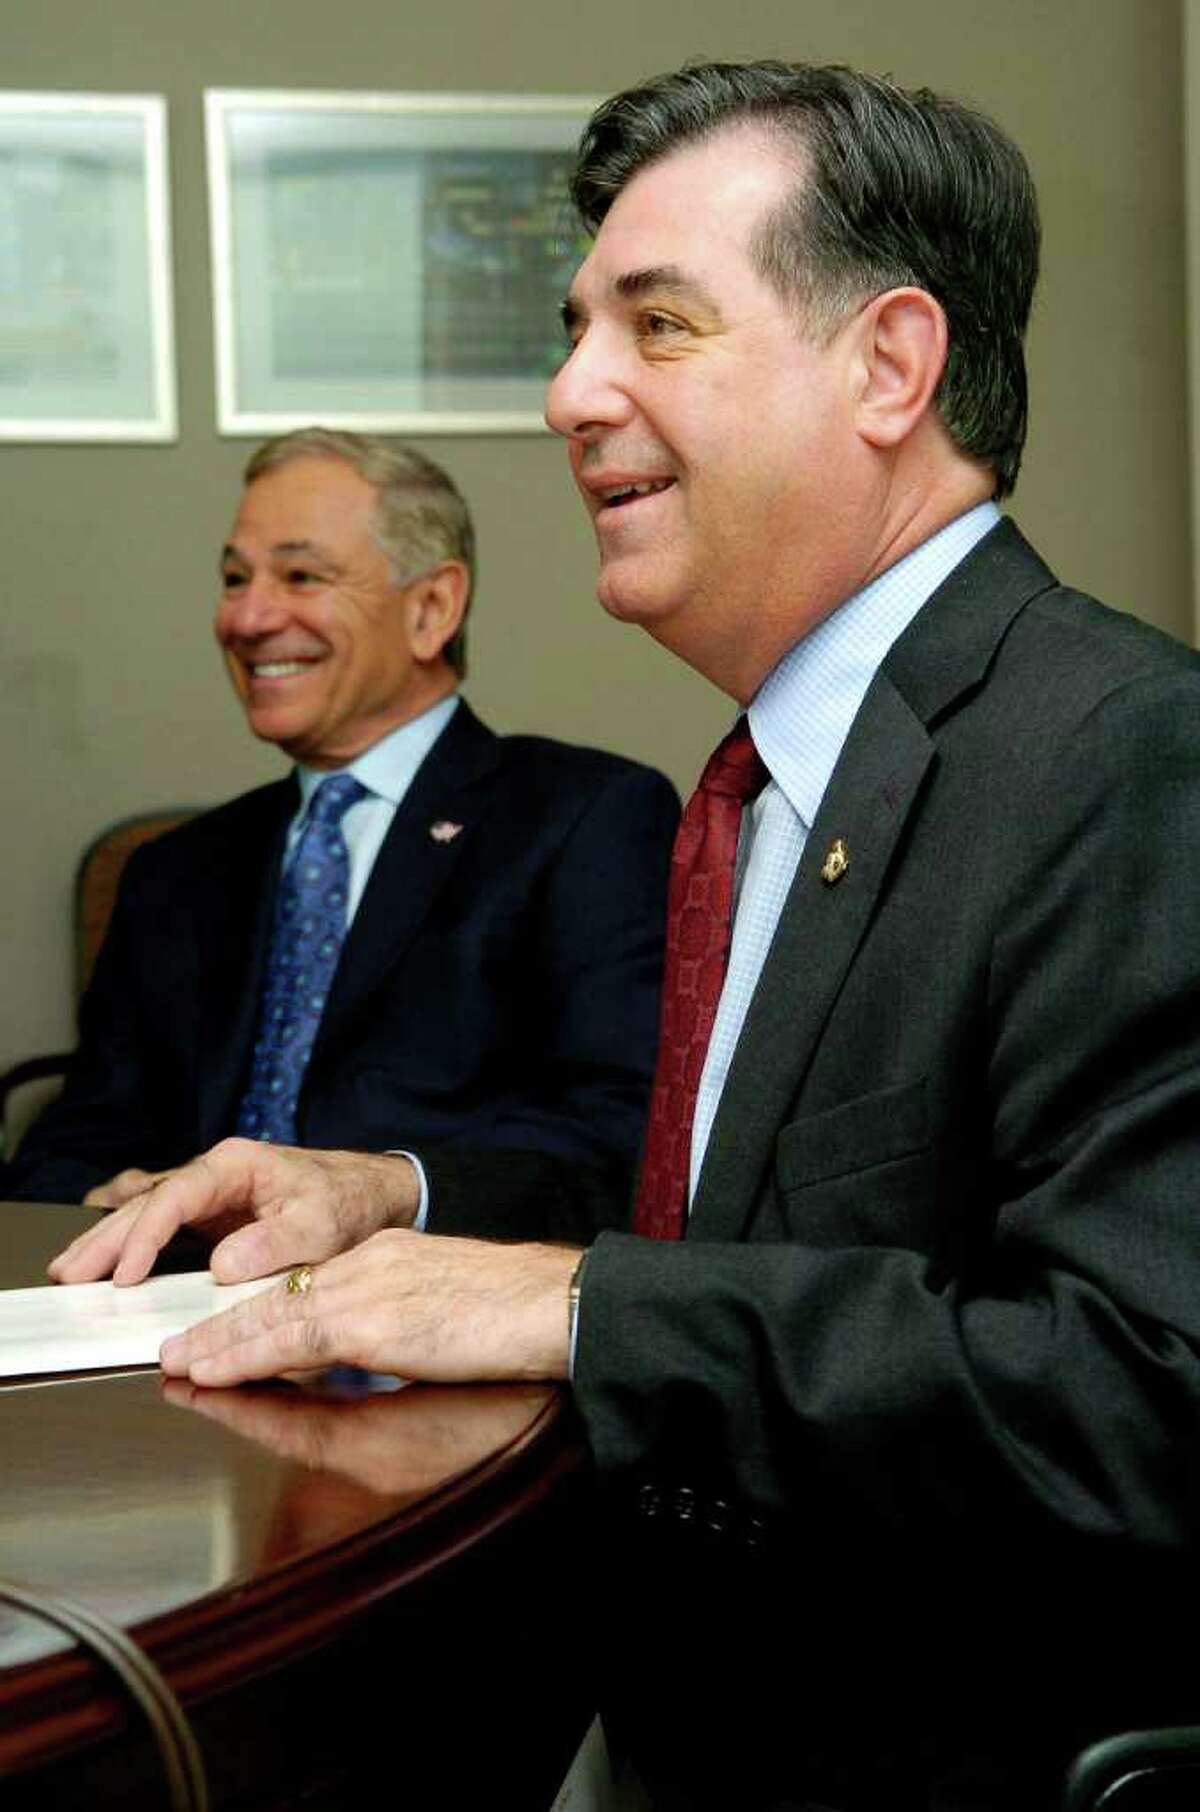 Mayor Michael Pavia names Bobby Valentine as the Director of Public Safety at a press conference at the Government Center in Stamford, Conn. on Thursday January 13, 2011.